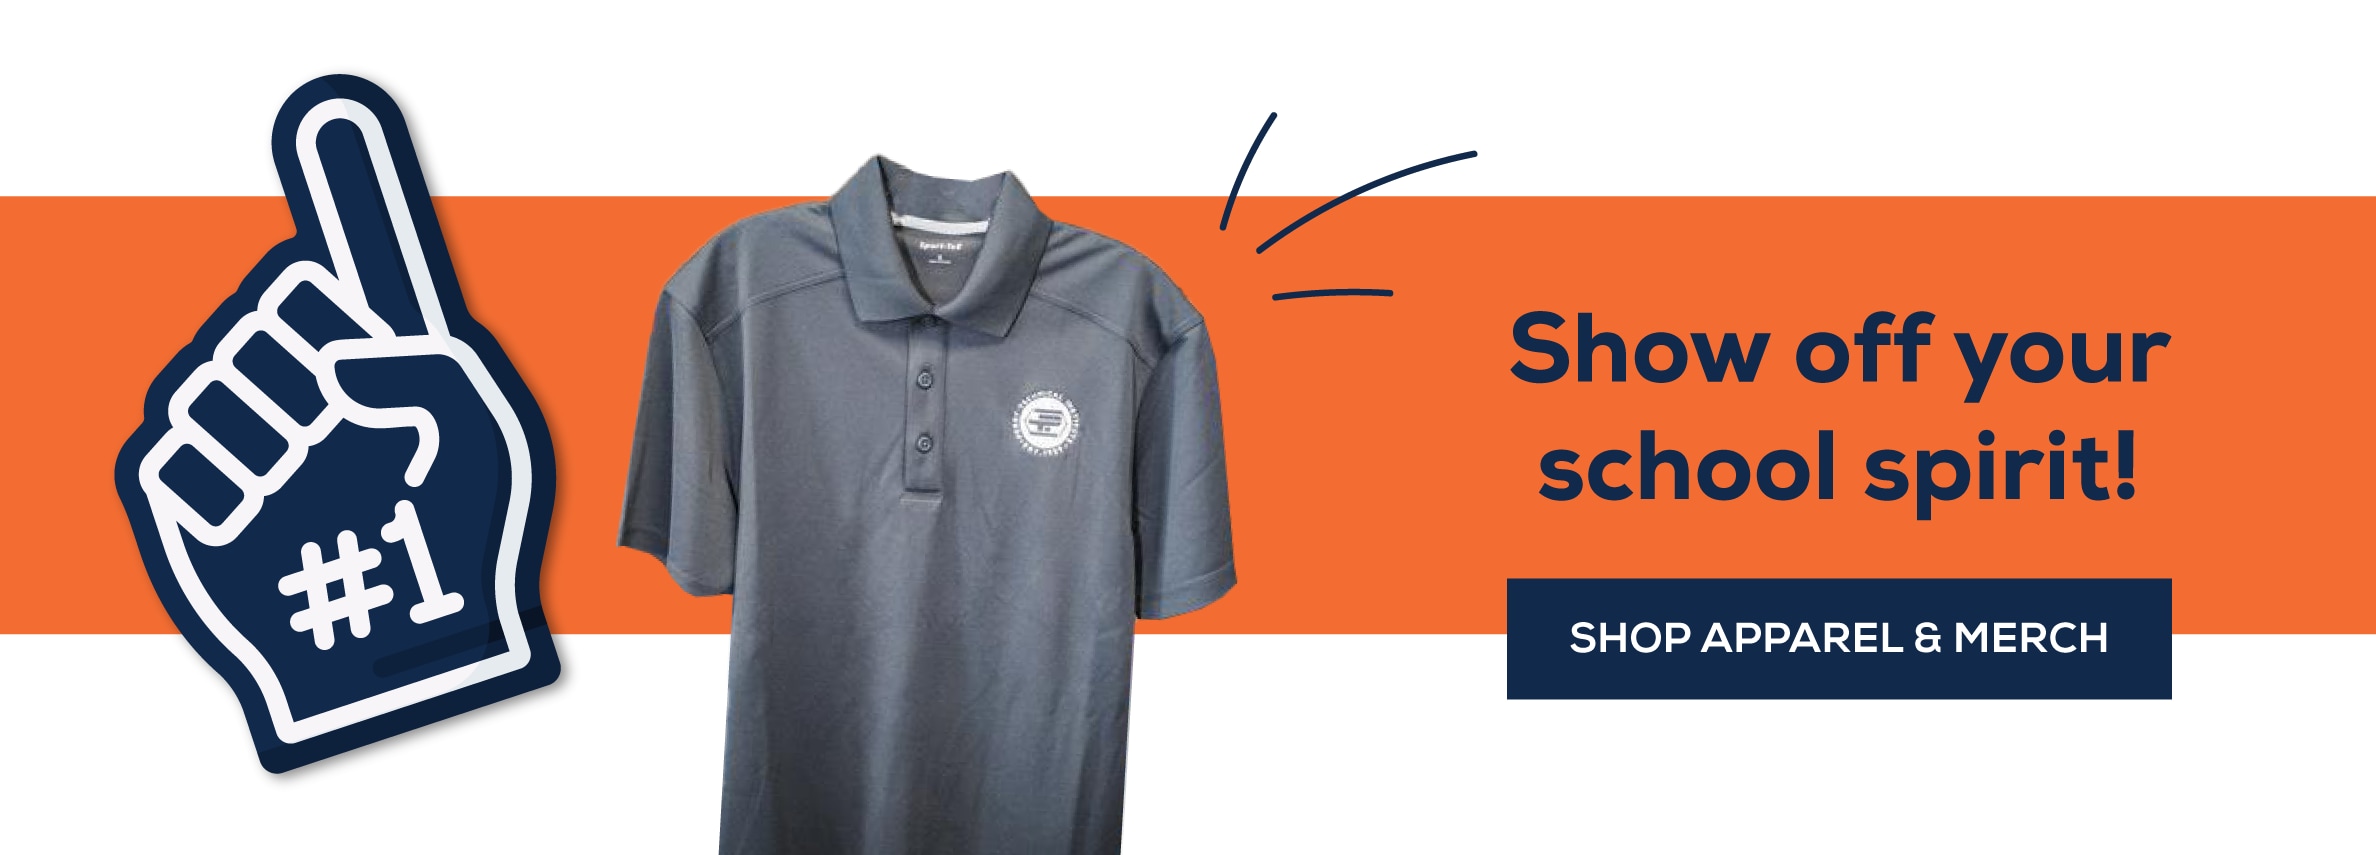 Show off your school sprit! Shop apparel and merch